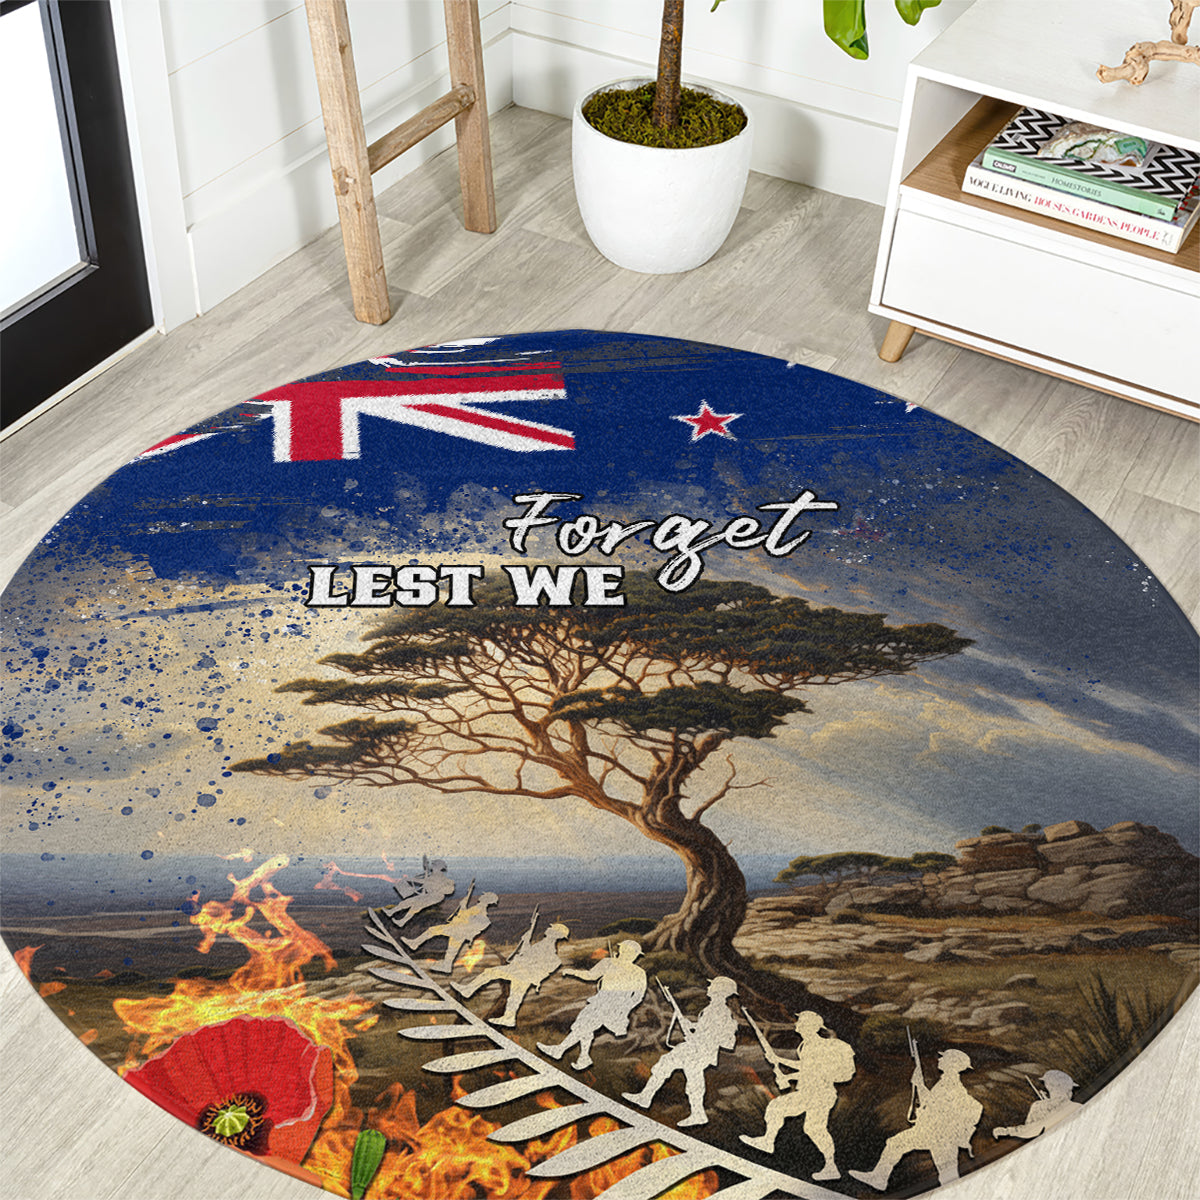 New Zealand ANZAC Day Round Carpet The Lonesome Pine With Soldier Fern LT05 Blue - Polynesian Pride